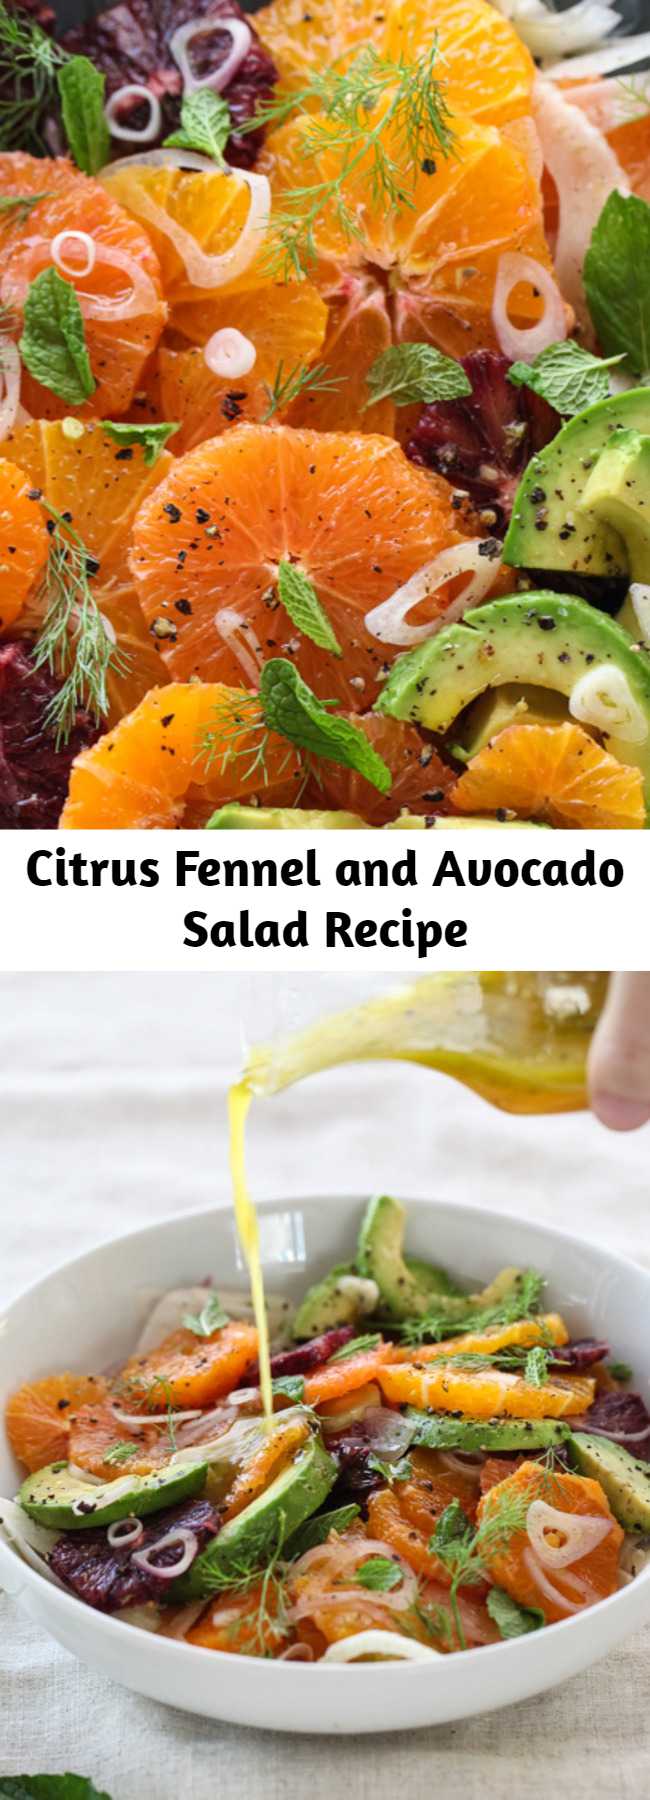 Citrus Fennel and Avocado Salad Recipe - Now, I’ve made renditions of this recipe plenty of times in the past, but never with this many different styles of antioxidant-filled, Vitamin C-packed, oranges.